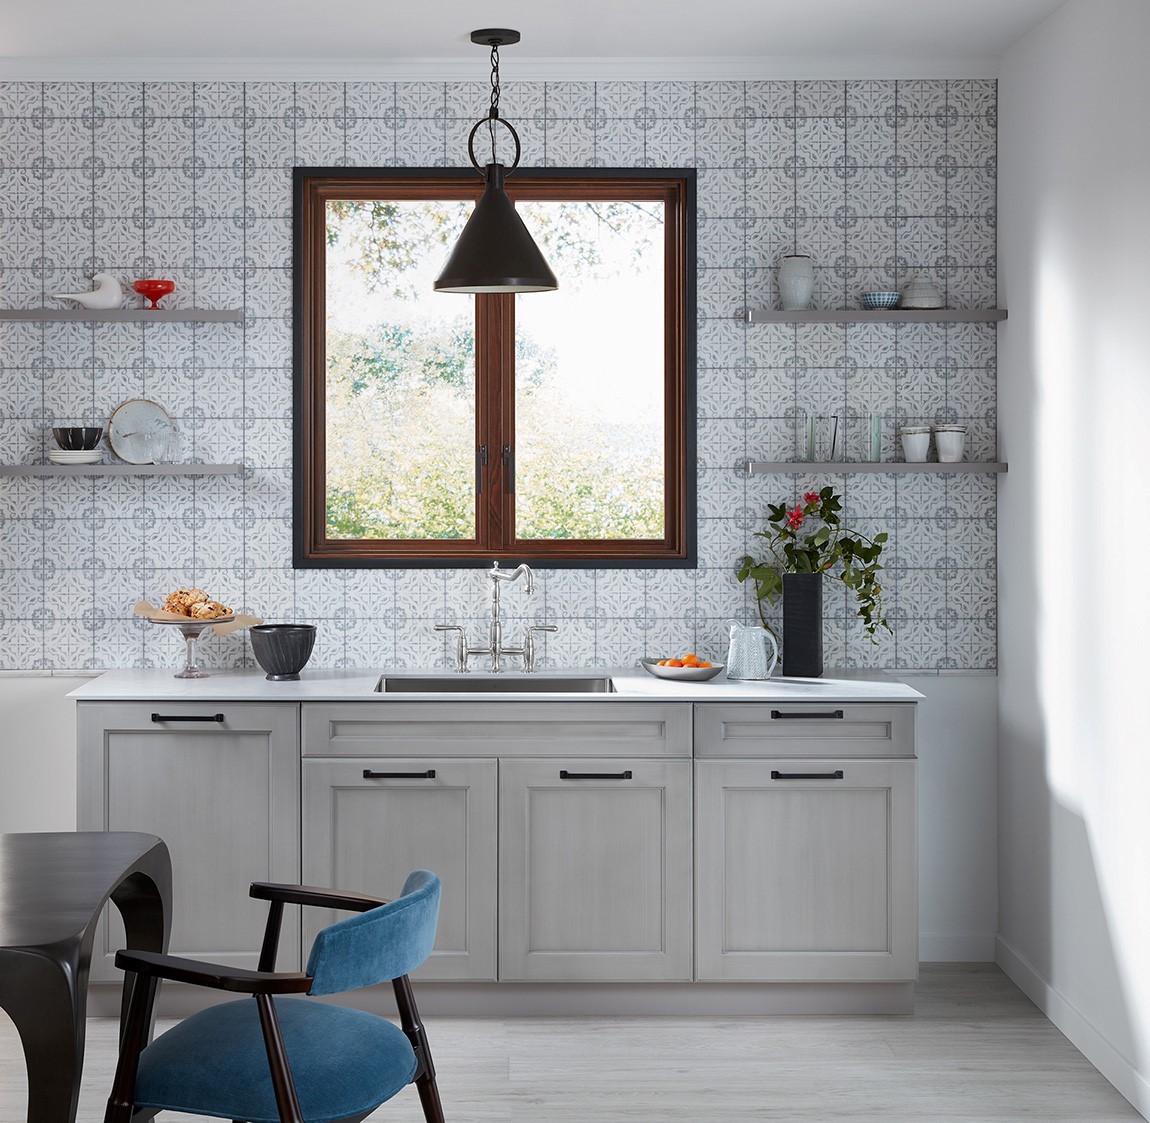 kitchen sink and counter with patterned backsplash